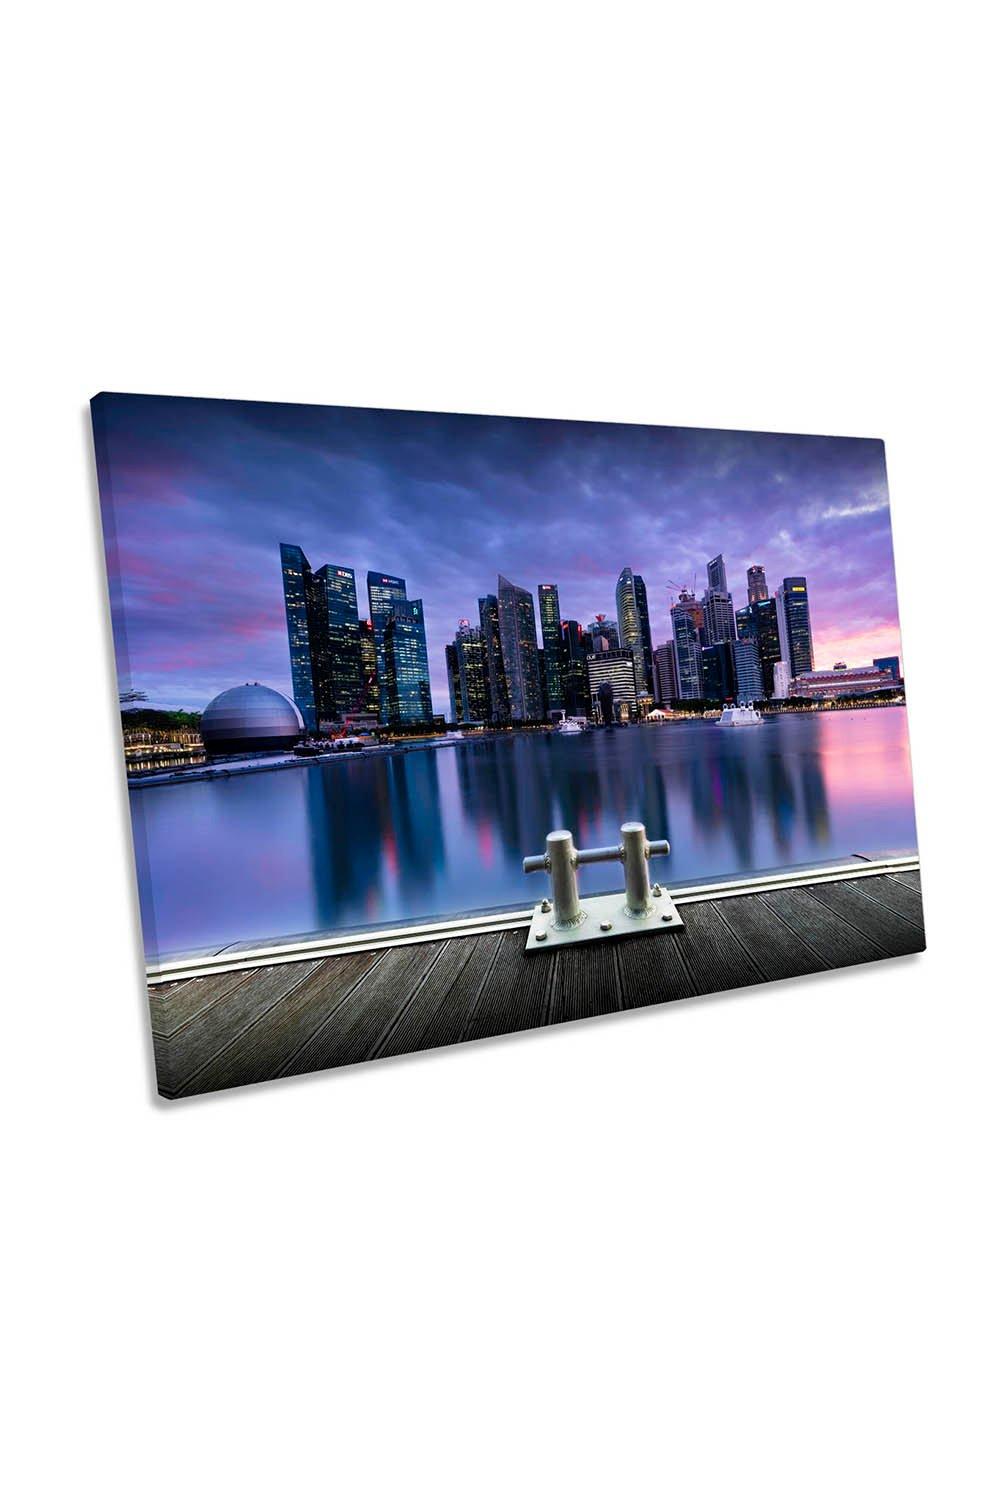 Anchoring Singapore City Skyline Canvas Wall Art Picture Print